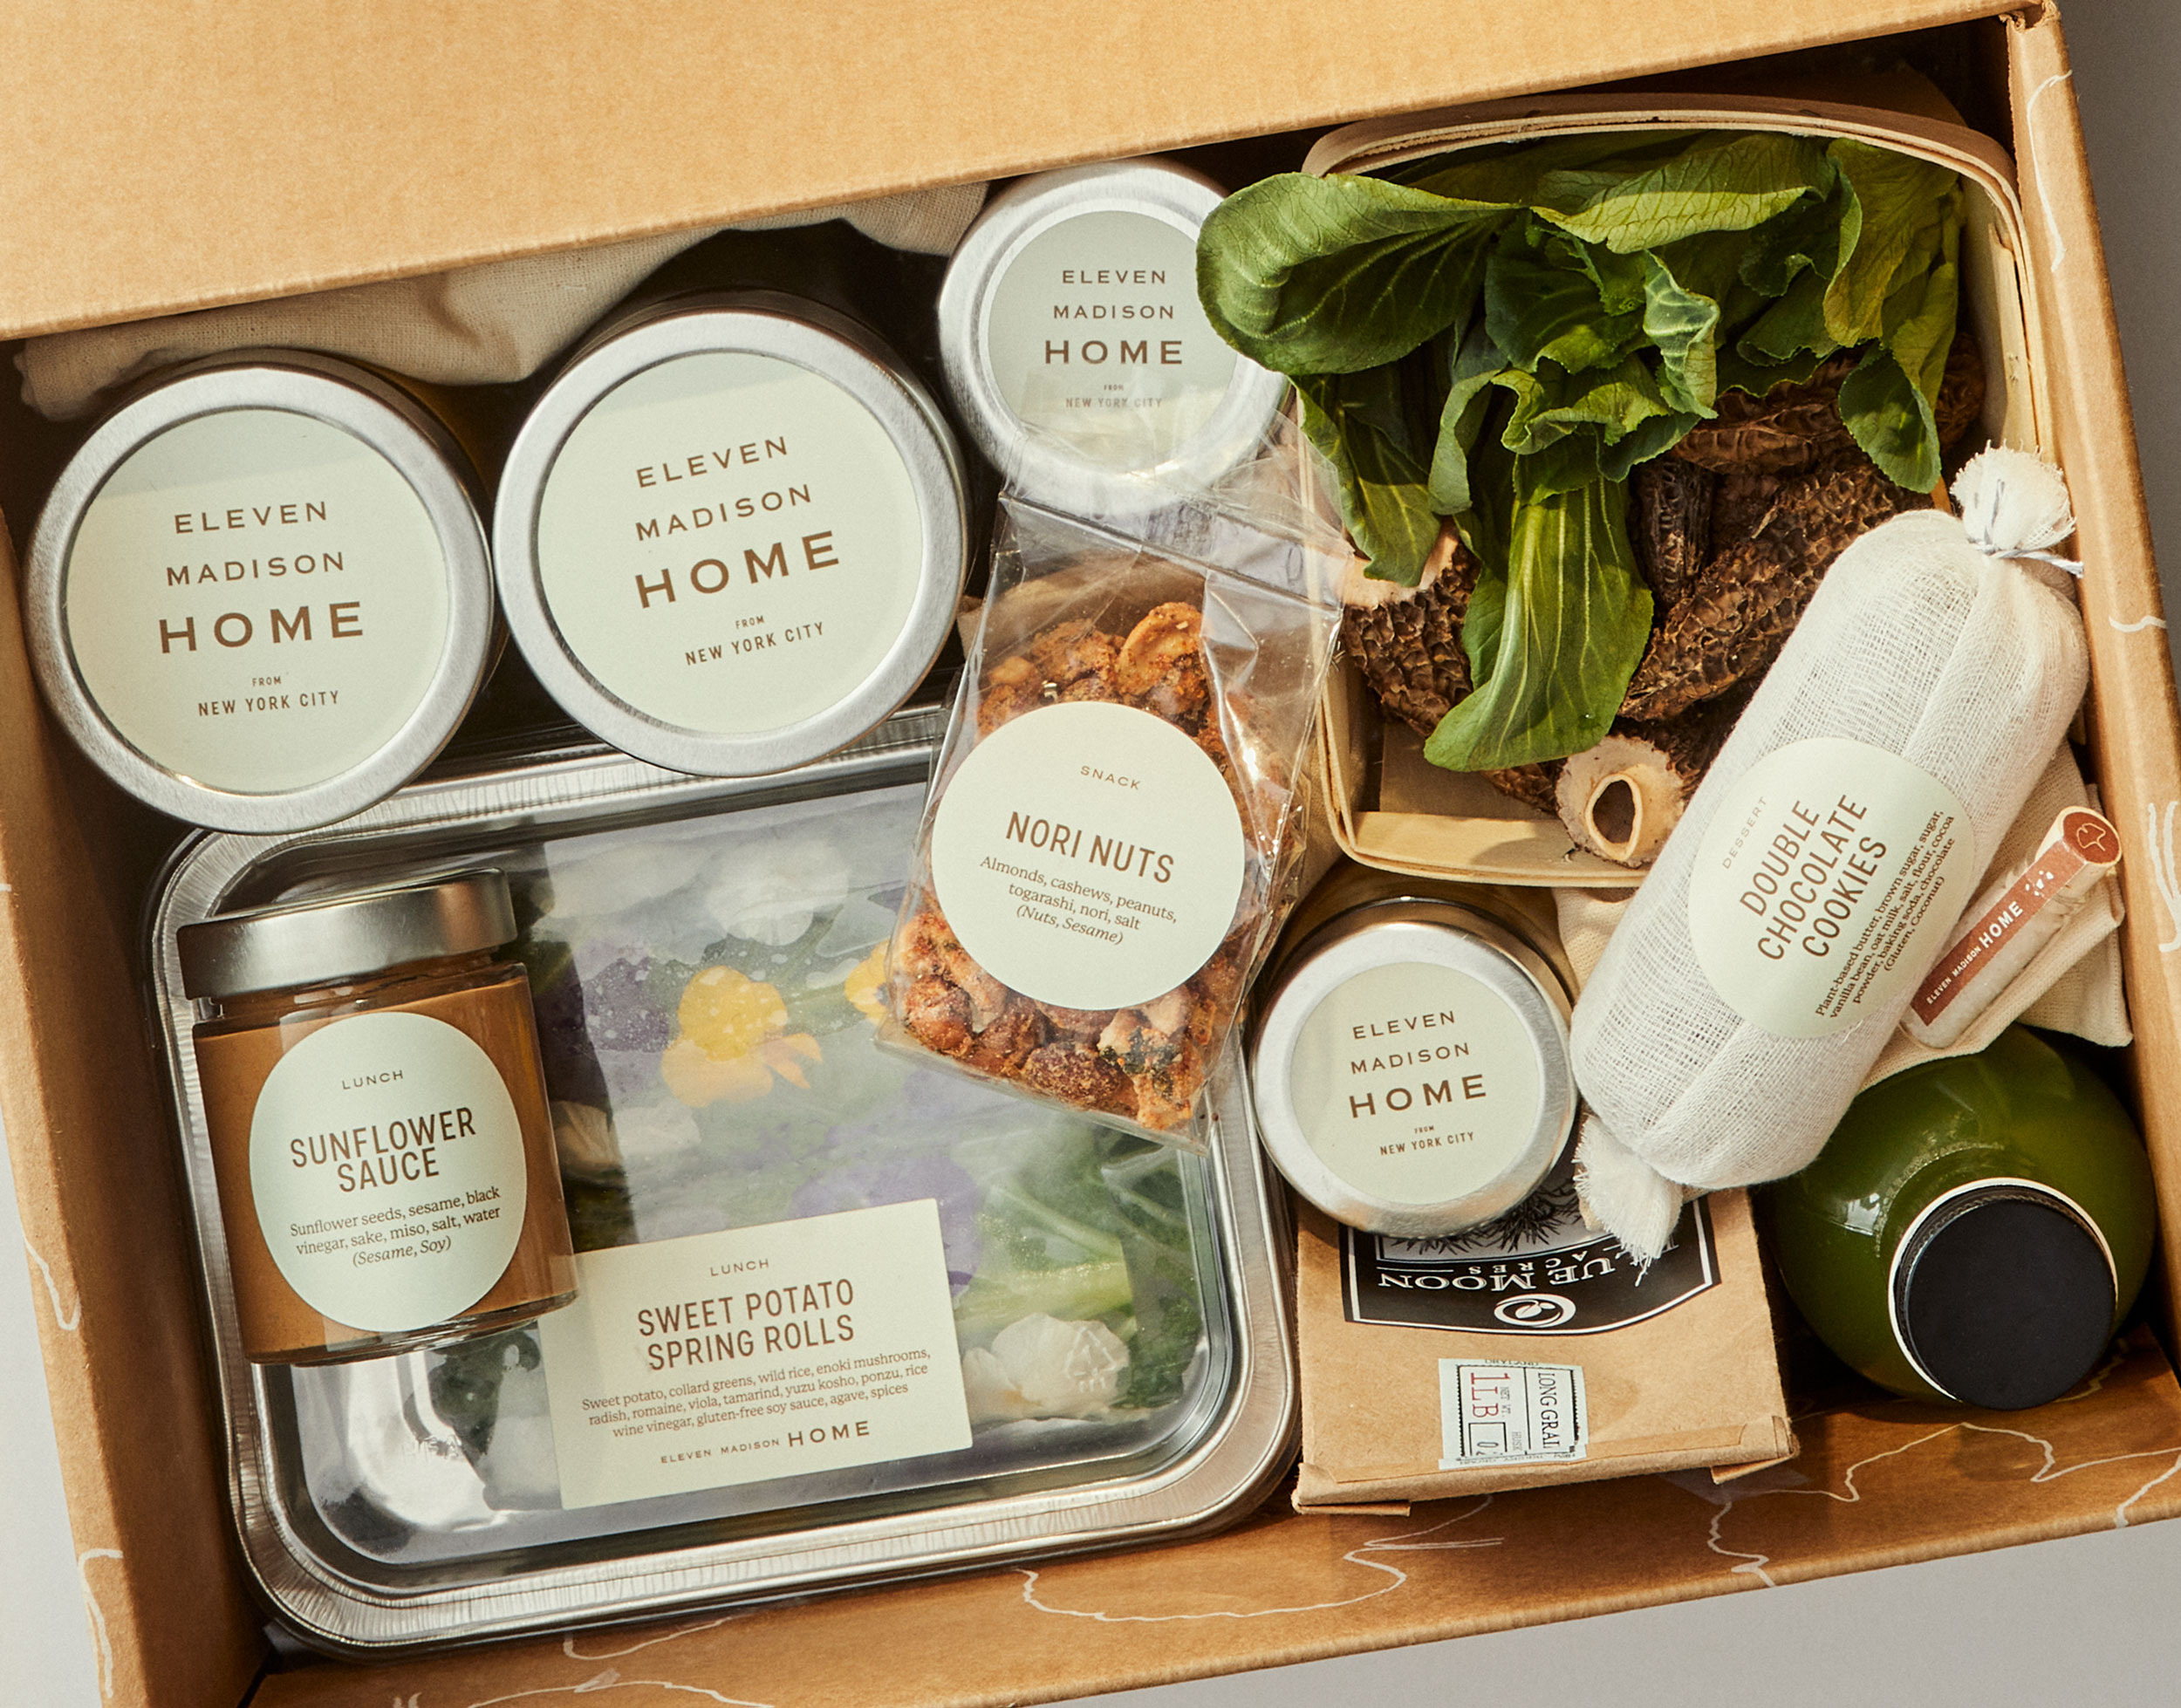 Is This The World's Most Expensive Vegan Meal Kit?